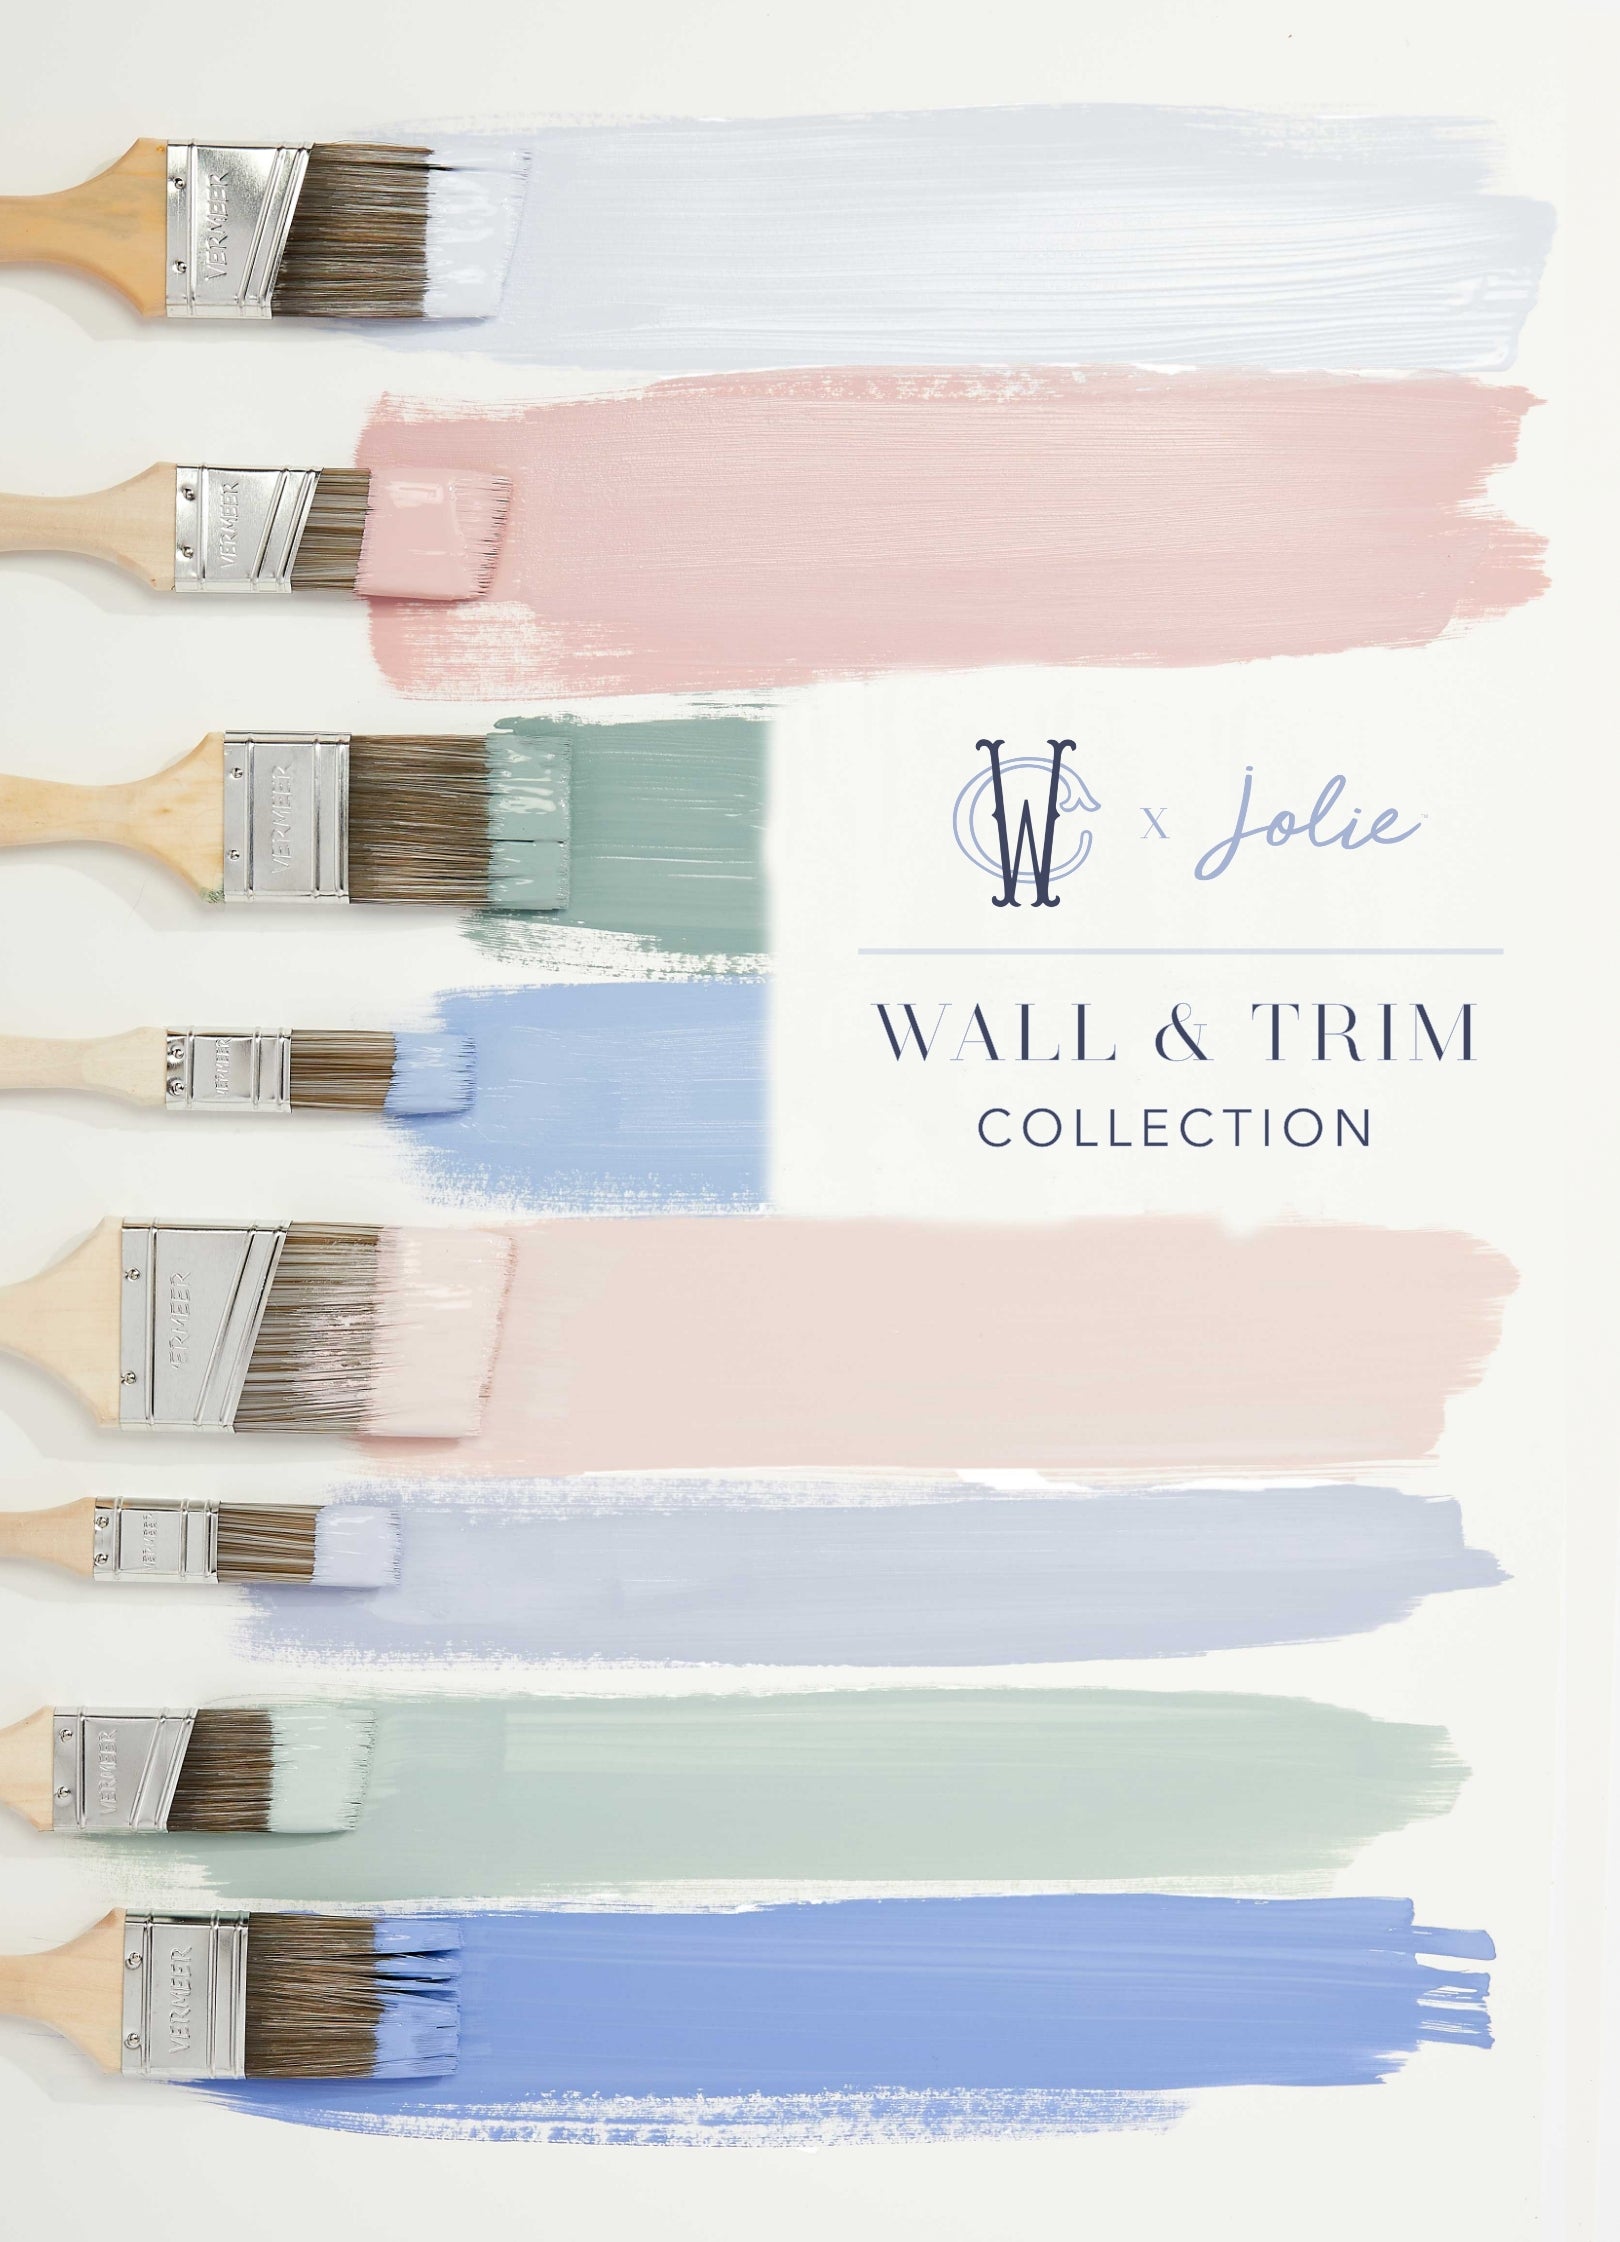 The Wall & Trim Collection is HERE!